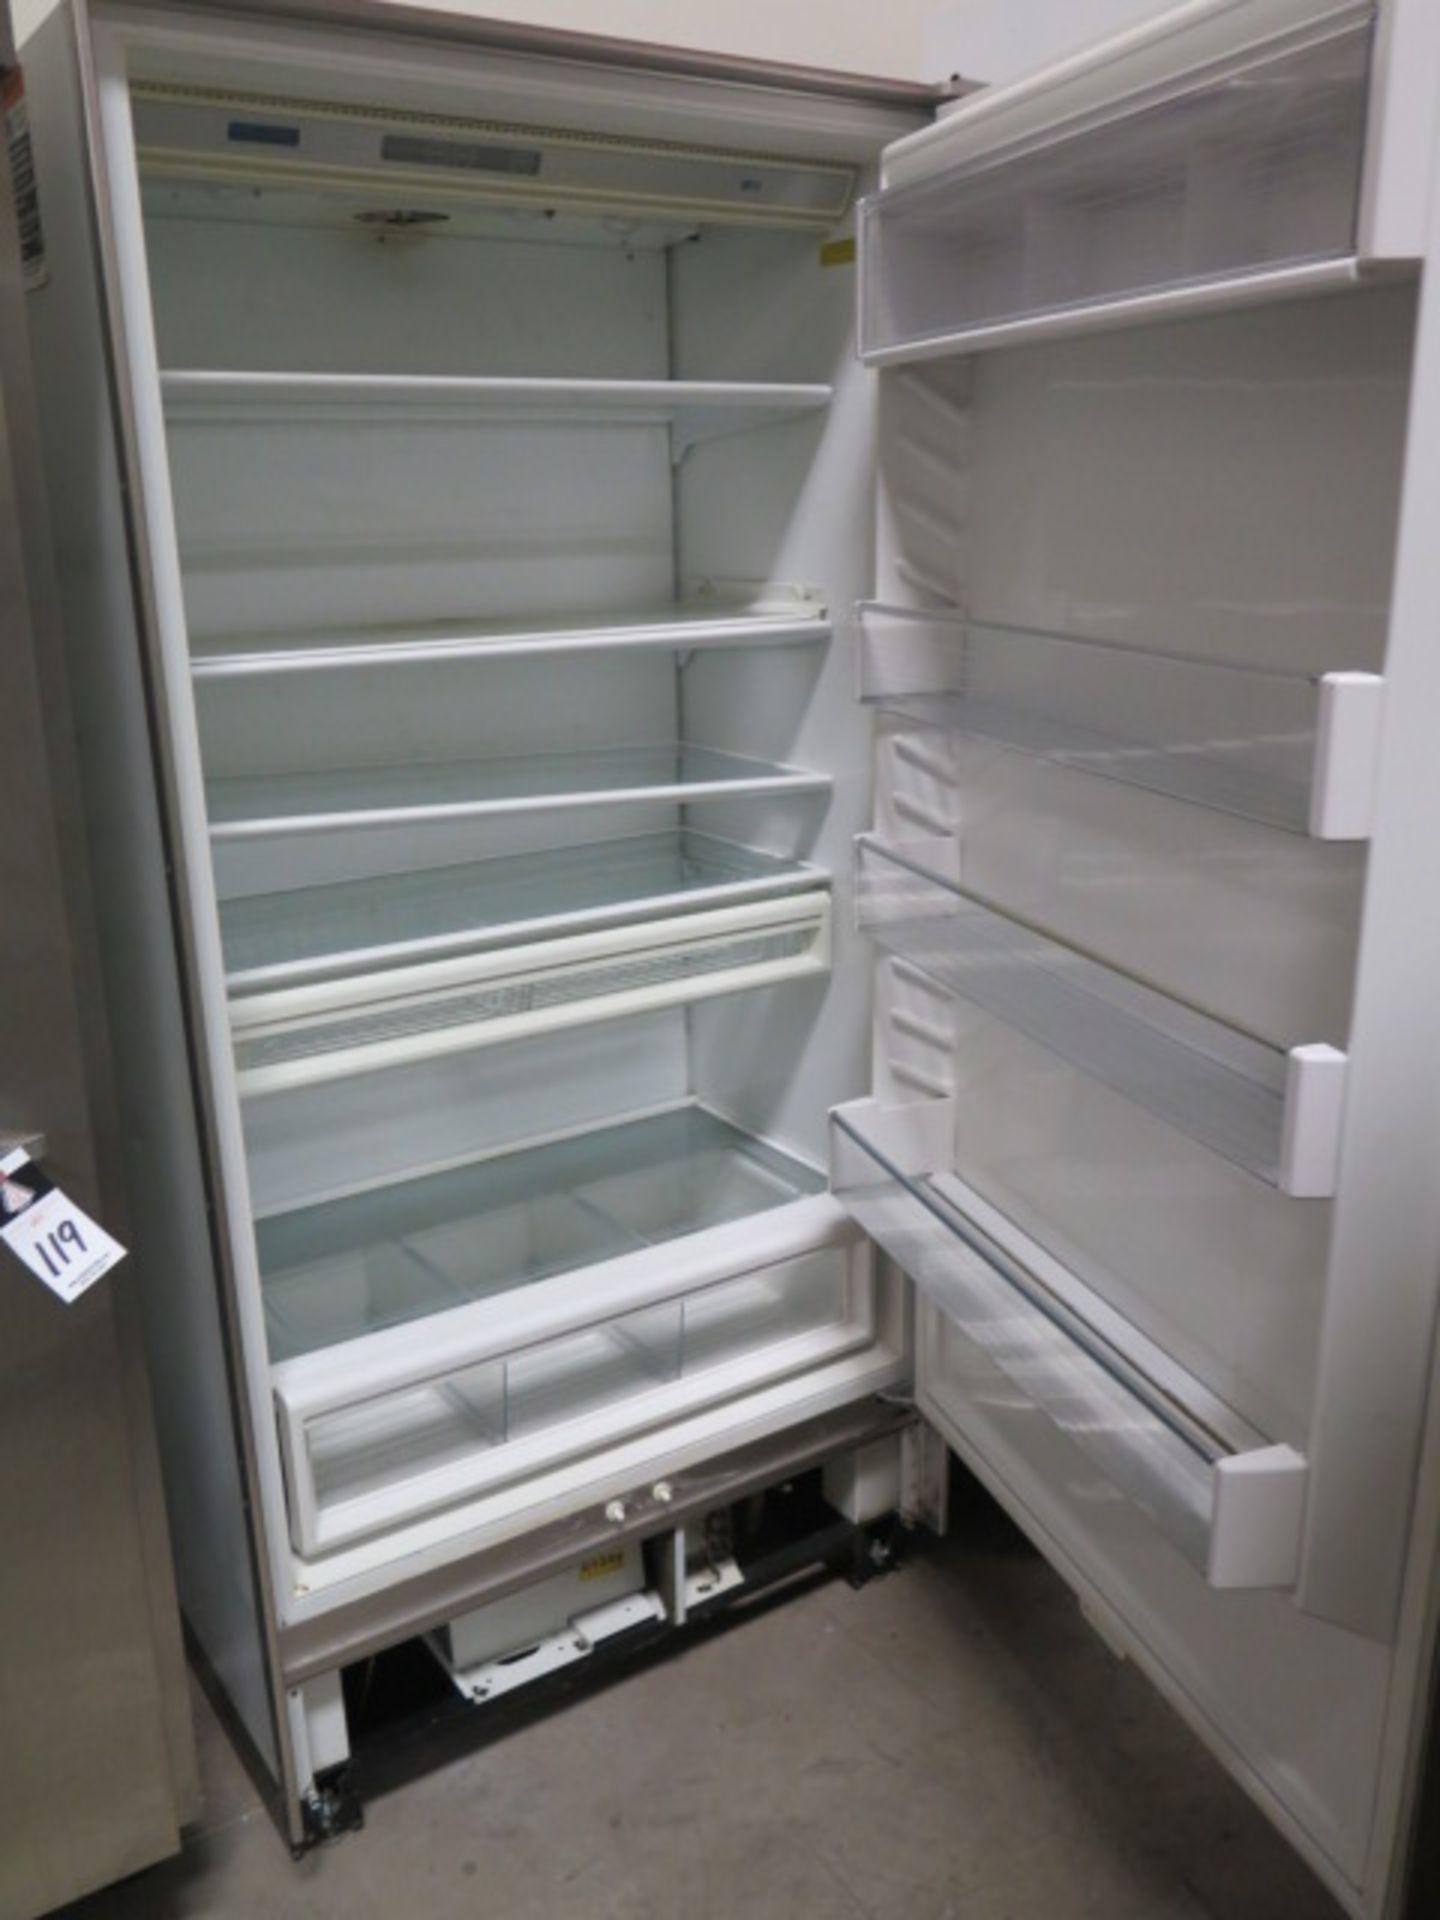 Sub-Zero mdl. 601R Stainless Steel Refrigerator - Image 2 of 4